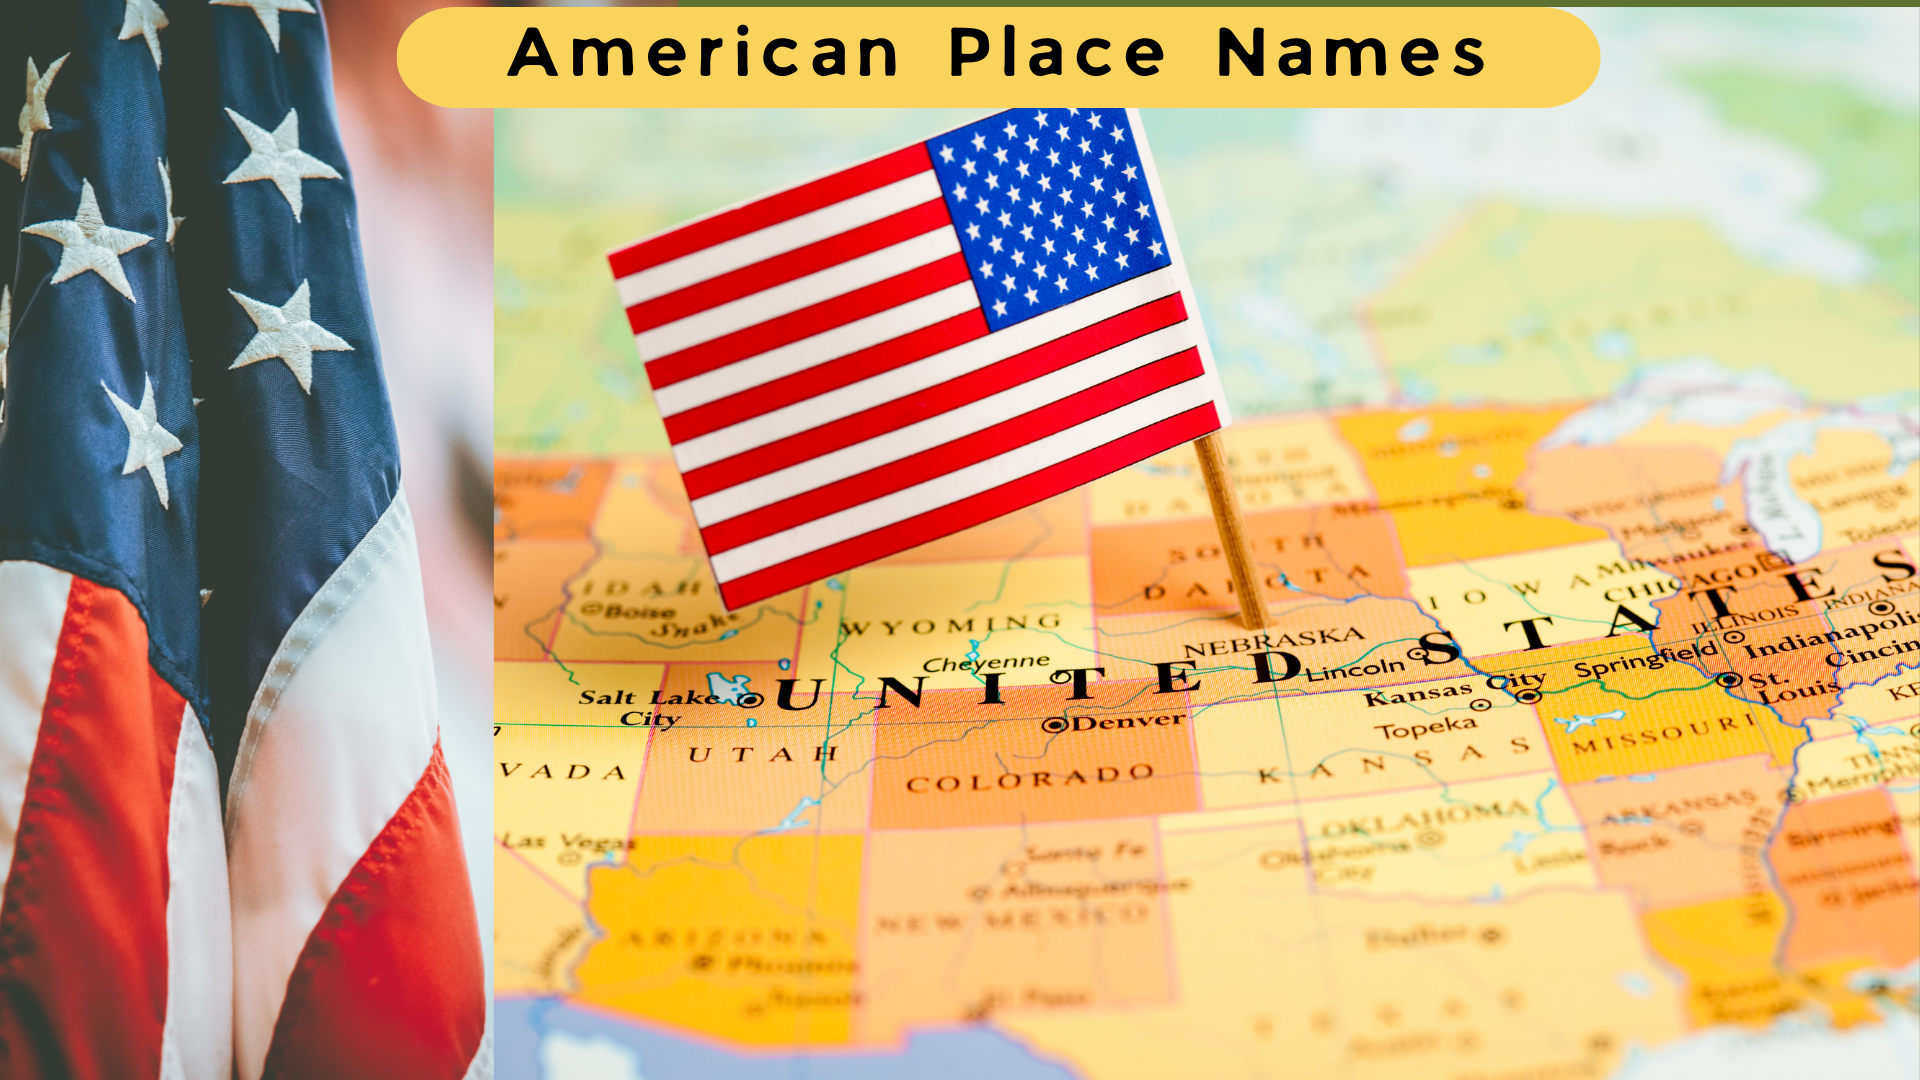 American Place Names